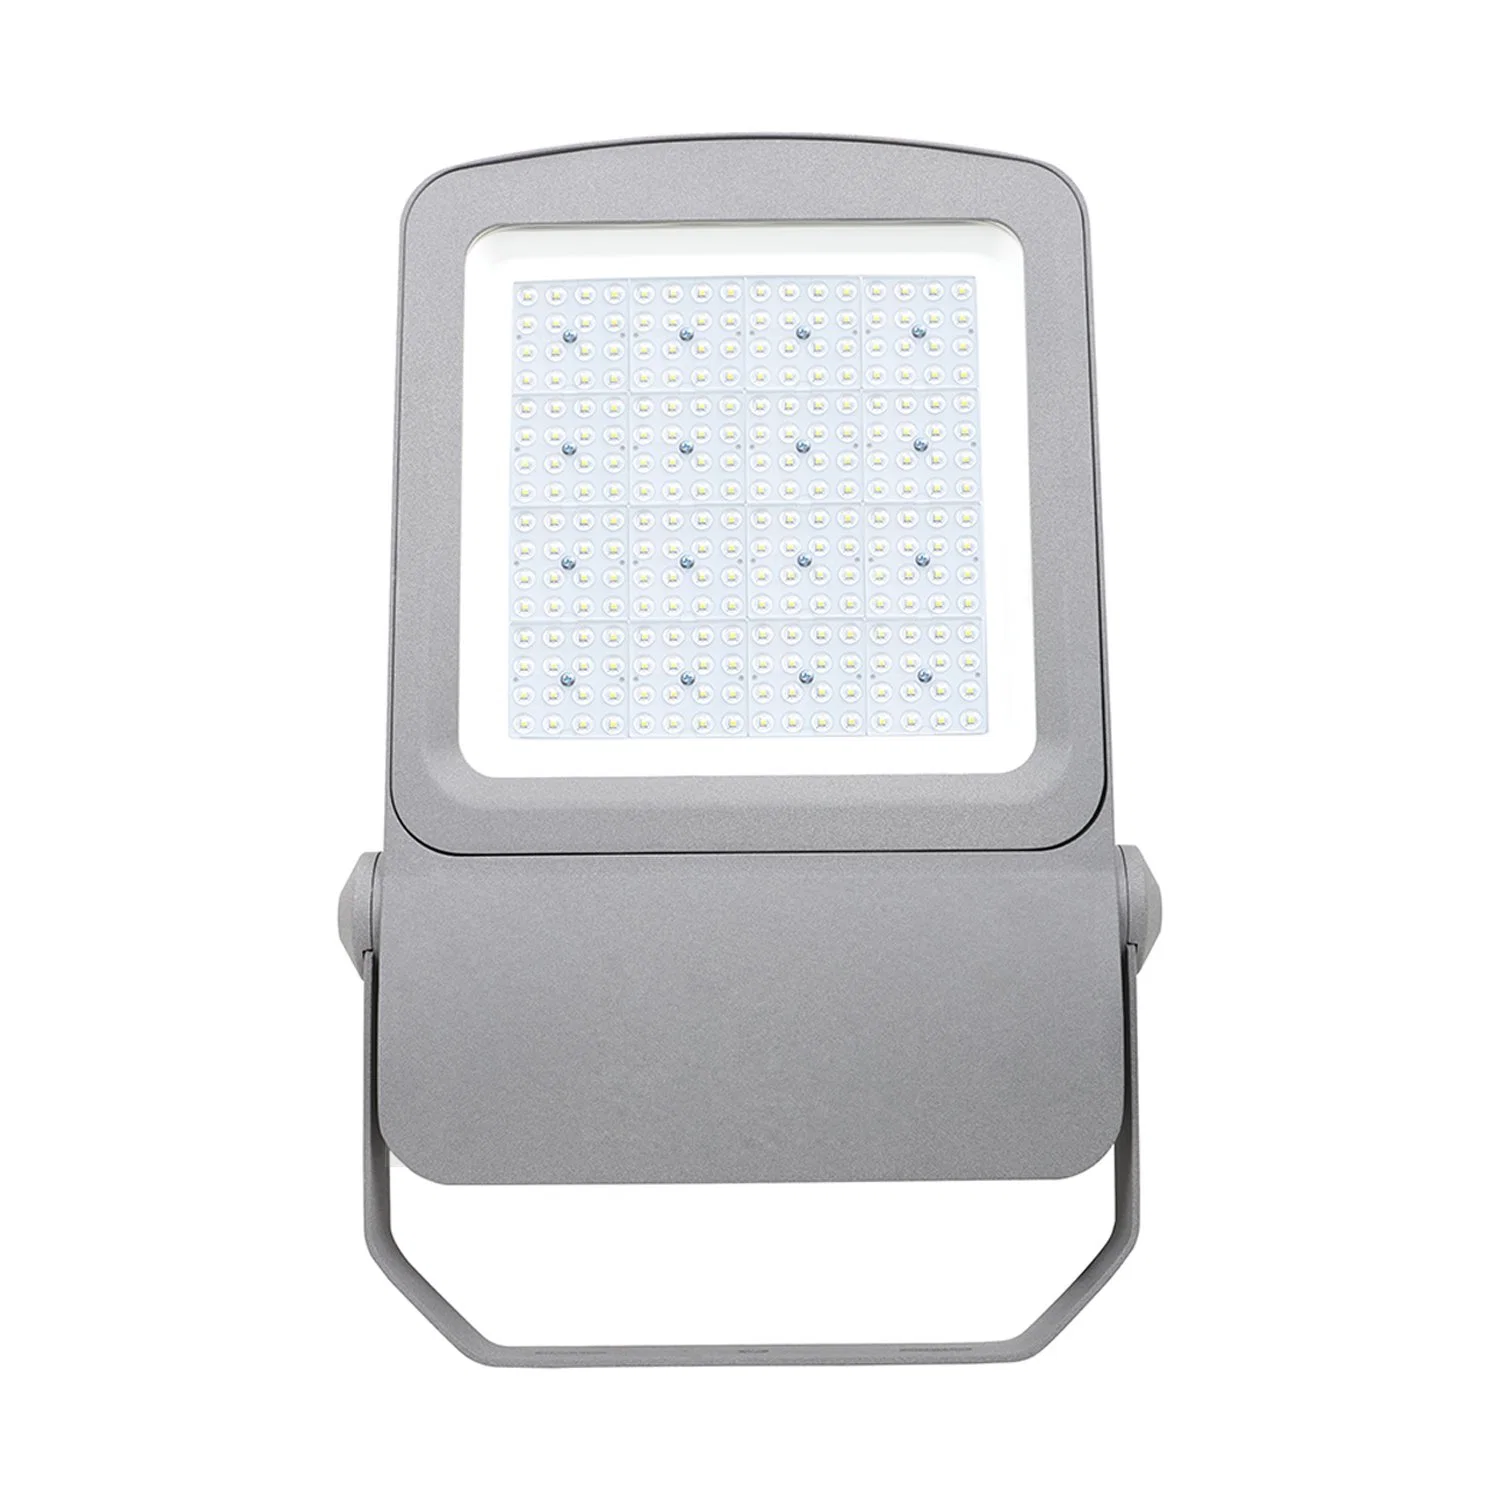 30W 50W 110W 120W 150W Industrial LED Outdoor Commercial Flood Lighting Housing Die Casting Aluminum Flood Light Fixture